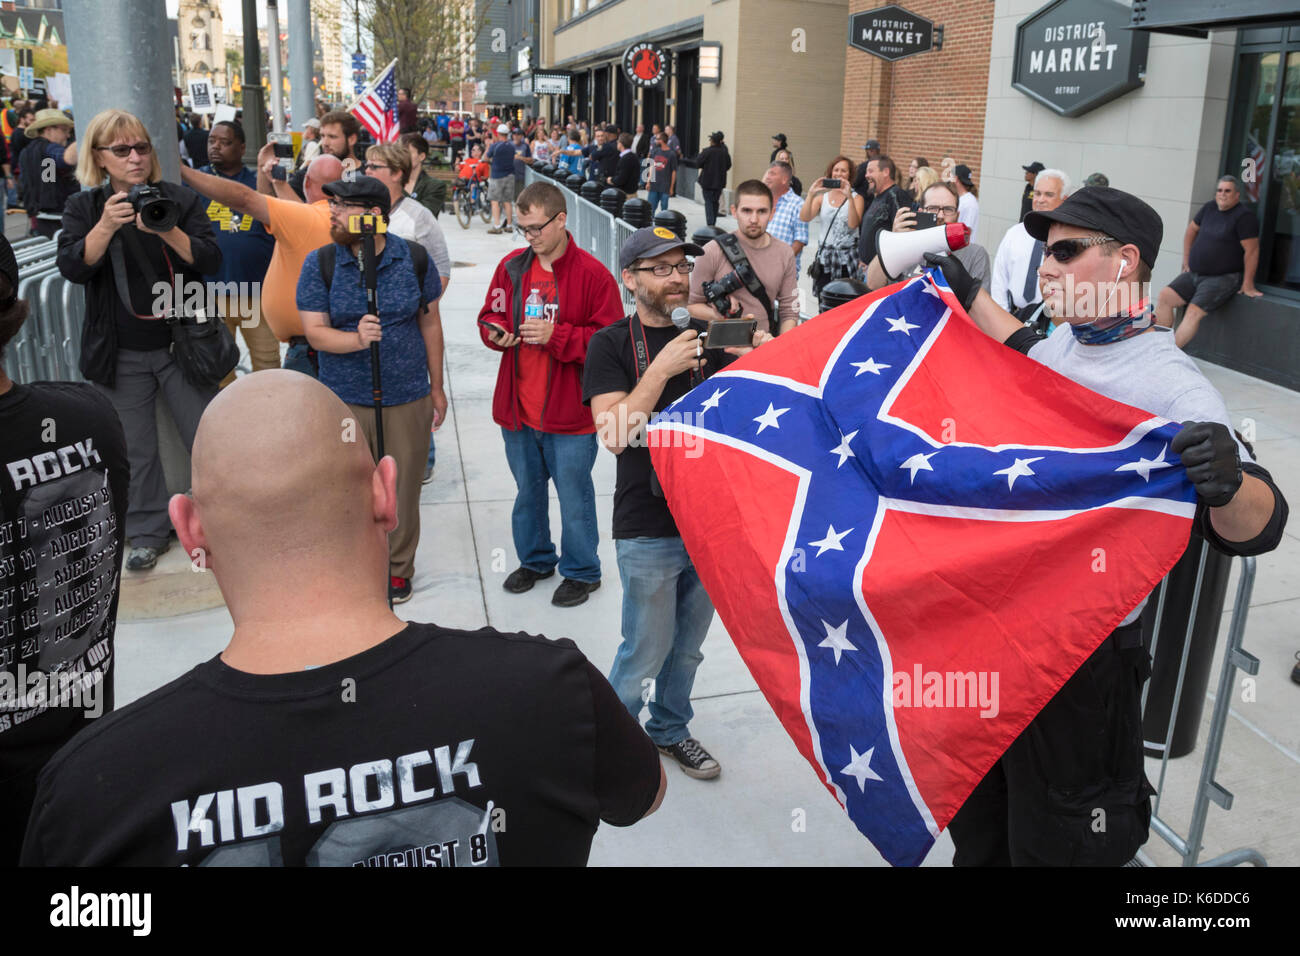 Detroit, Michigan USA - 12 September 2017 - As the new Little Caesars sports/concert arena opened, people protested the selection of Kid Rock for the arena's inaugural concert. A Kid Rock supporter displays a Confederate flag to protesters. The singer has displayed the Confederate flag at some of his past concerts; protesters felt that was not an appropriate message for the arena, which was partially paid for with taxpayer dollars. Besides concerts, the arena will house the Detroit Red Wings and Detroit Pistons teams. Stock Photo